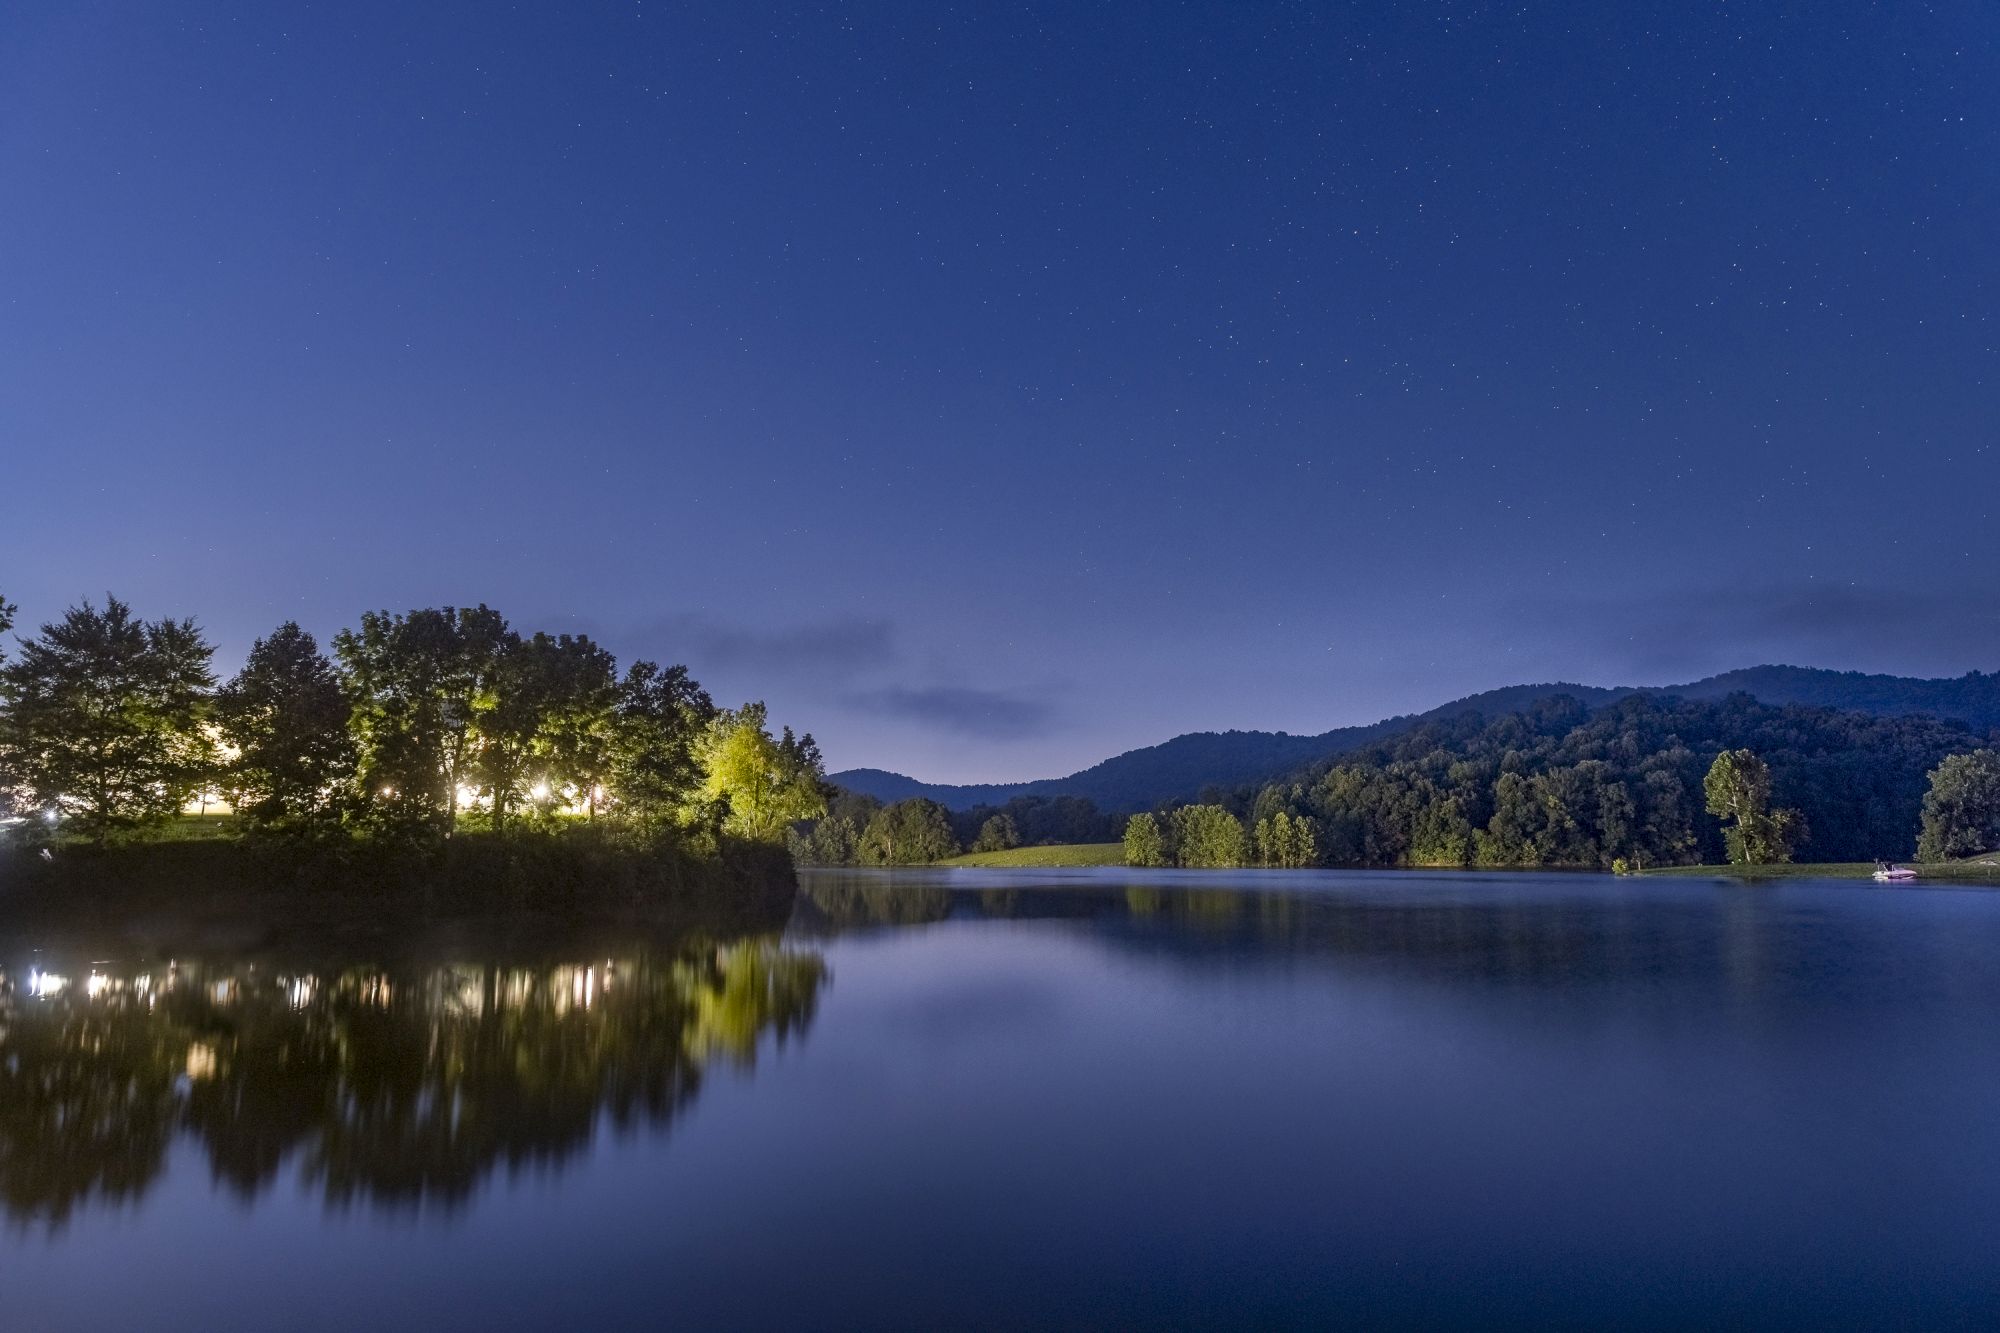 A serene lake scene at night, with lights illuminating trees on the left and a tranquil reflection on the water, under a clear, starry sky.